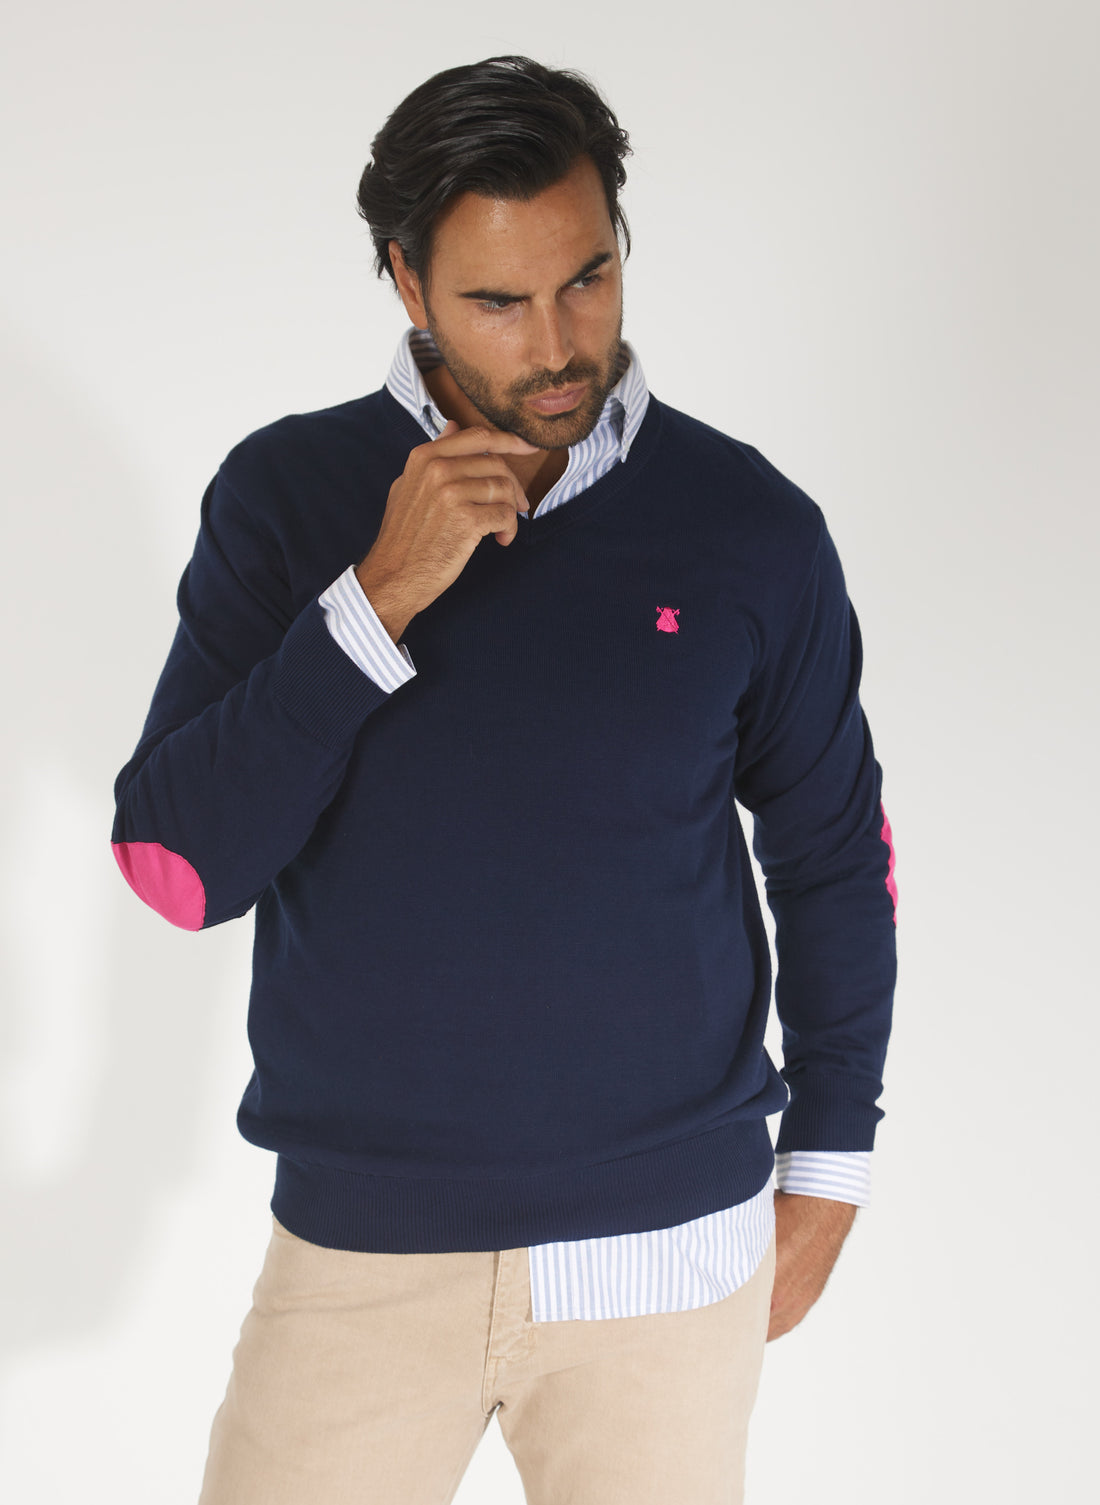 Navy Blue Sweater with Pink Elbow Pads for Man